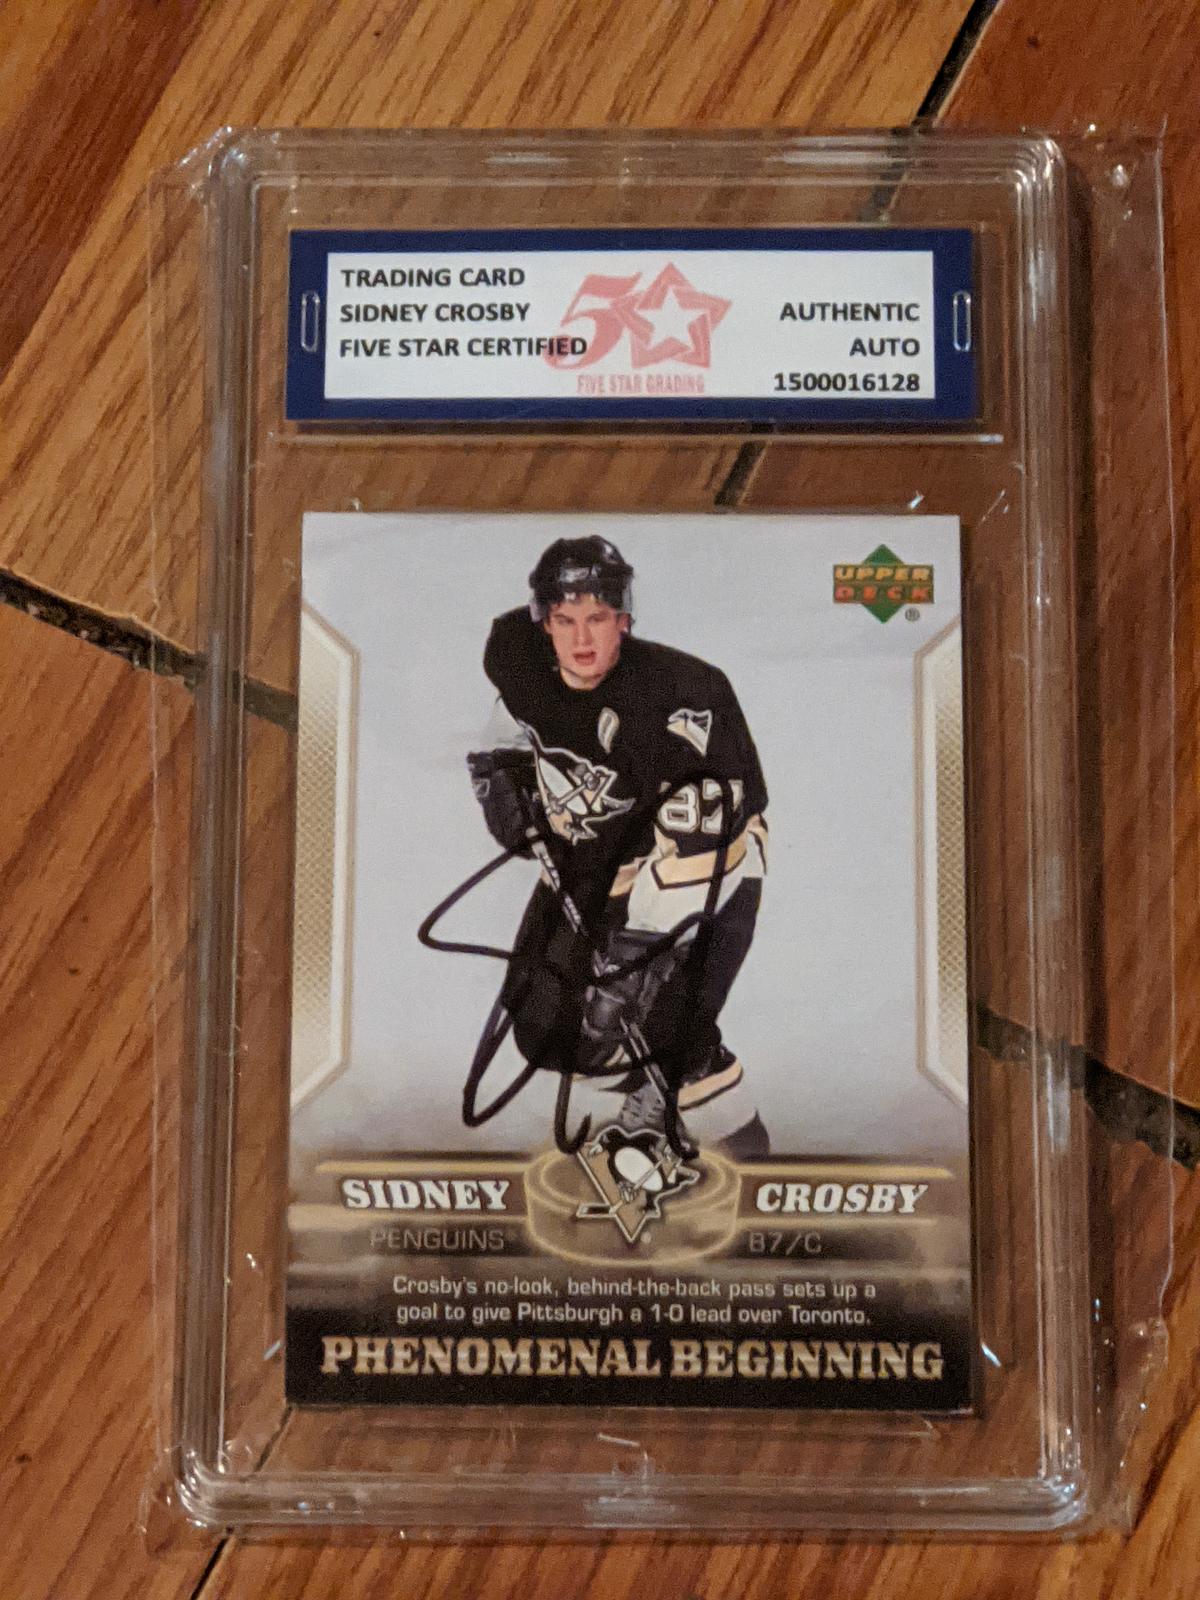 Sidney Crosby 2006 autograph Authenticated by Fivestar Grading